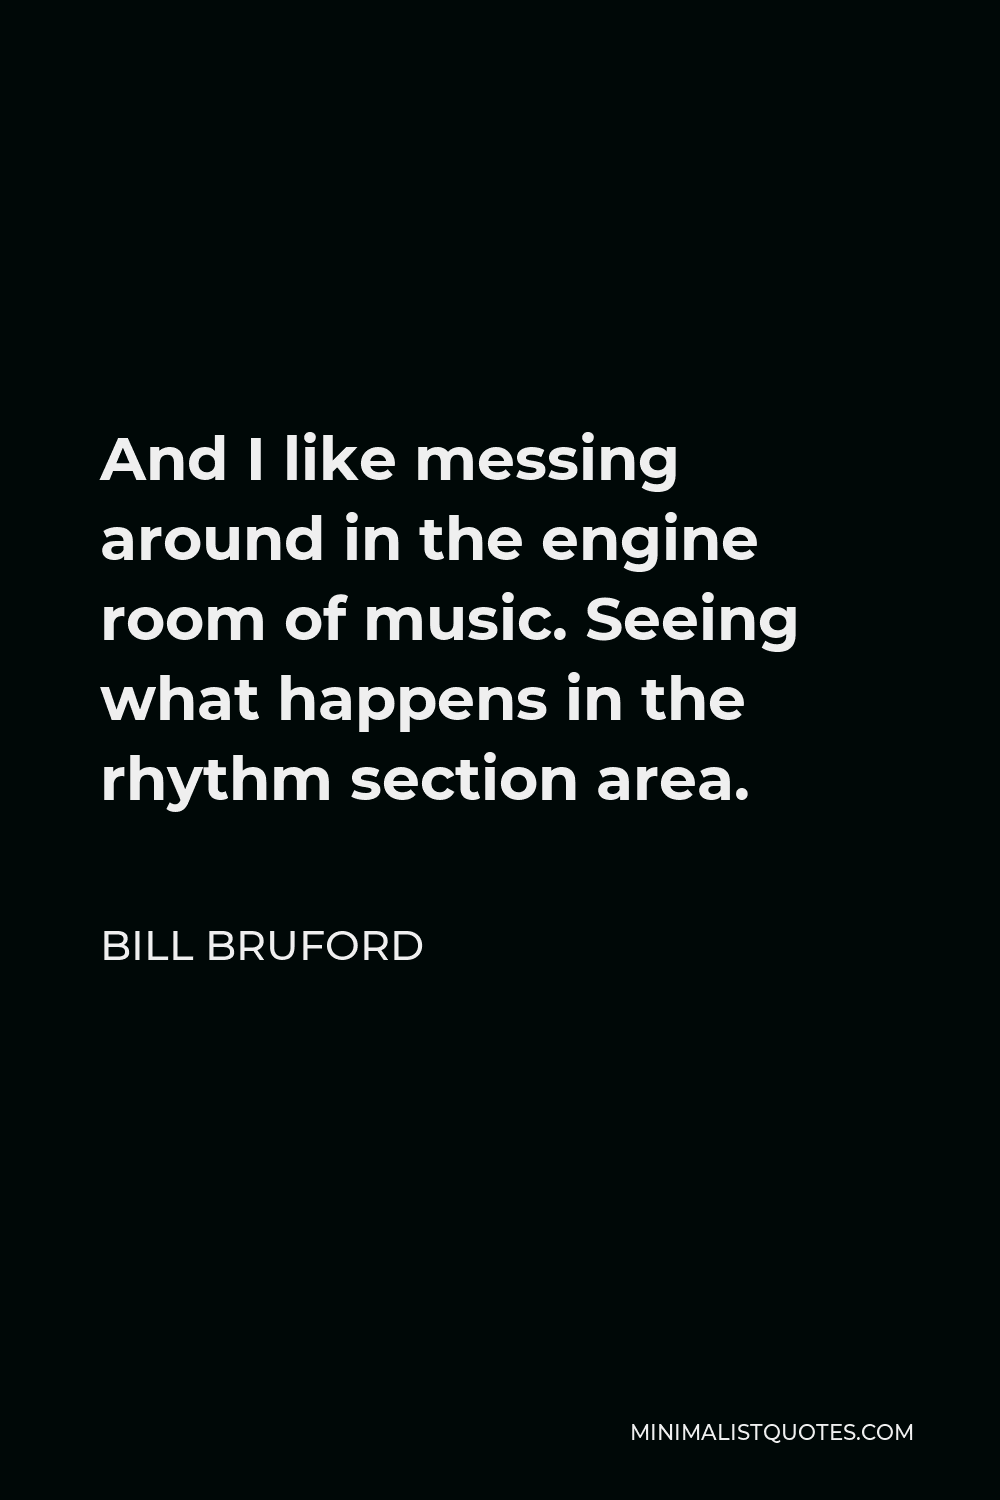 Bill Bruford Quote - And I like messing around in the engine room of music. Seeing what happens in the rhythm section area.